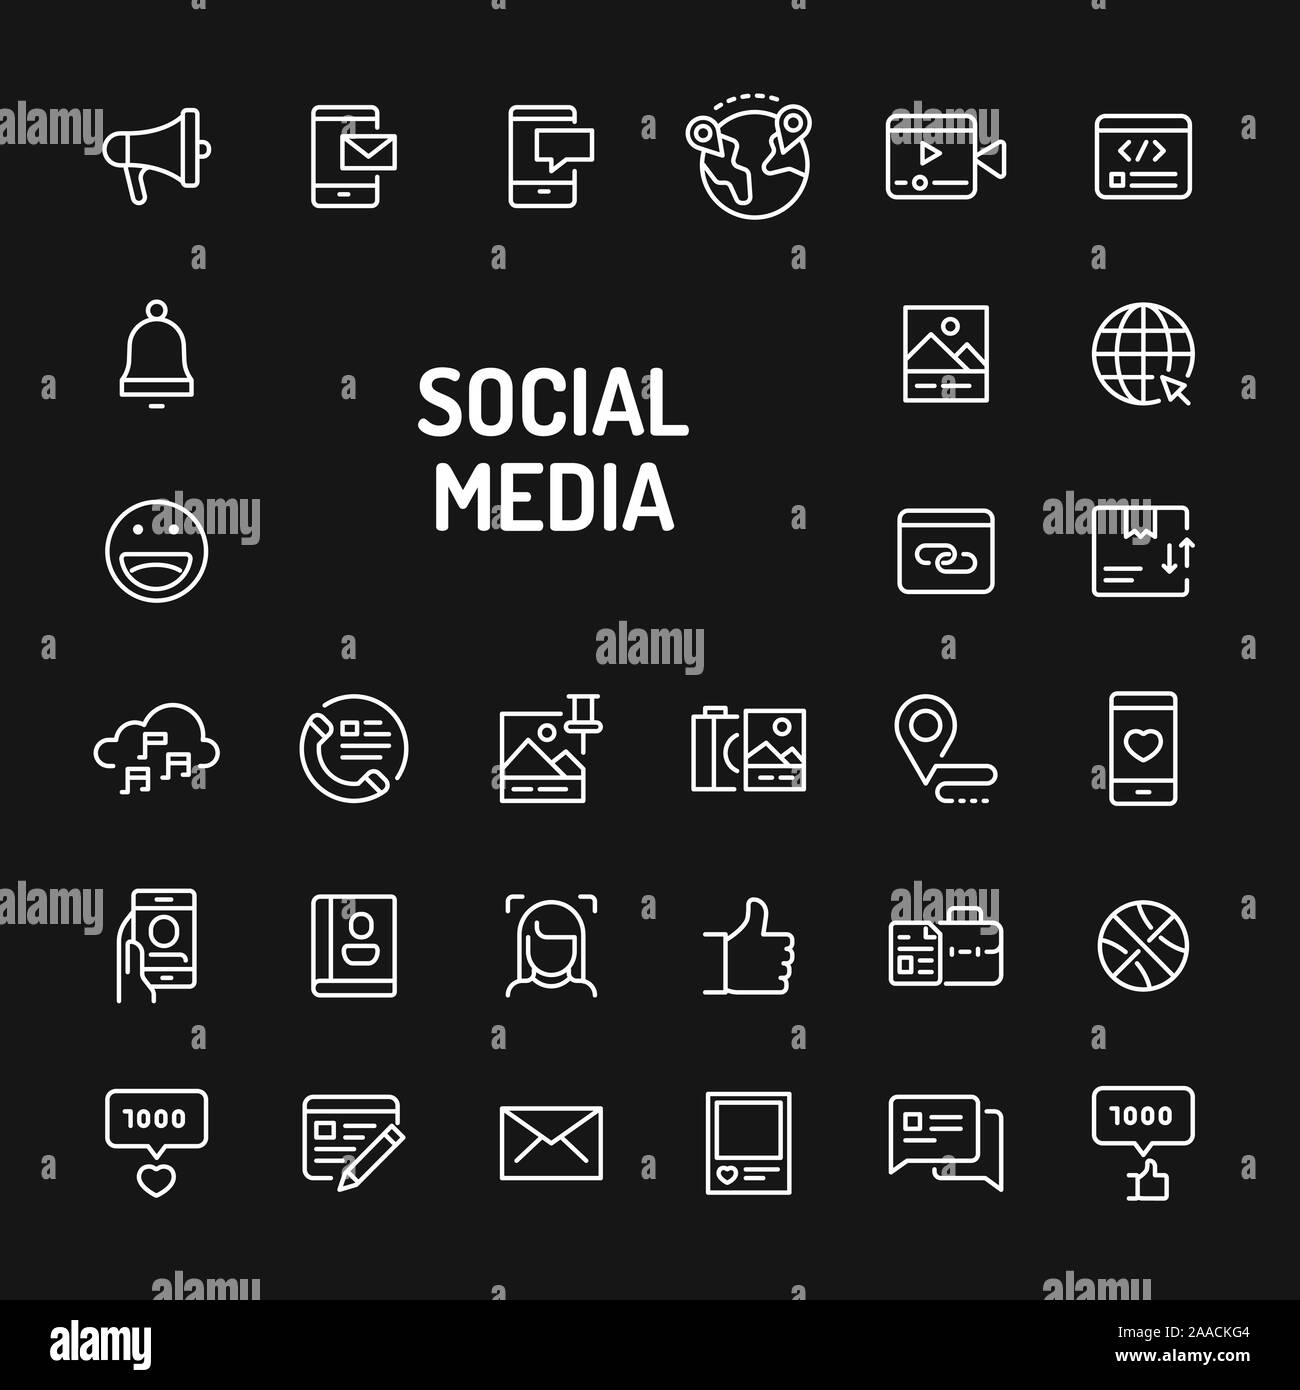 Simple white line icons isolated over black background related to social media, interaction, sharing & exchange. Vector signs and symbols collections Stock Vector